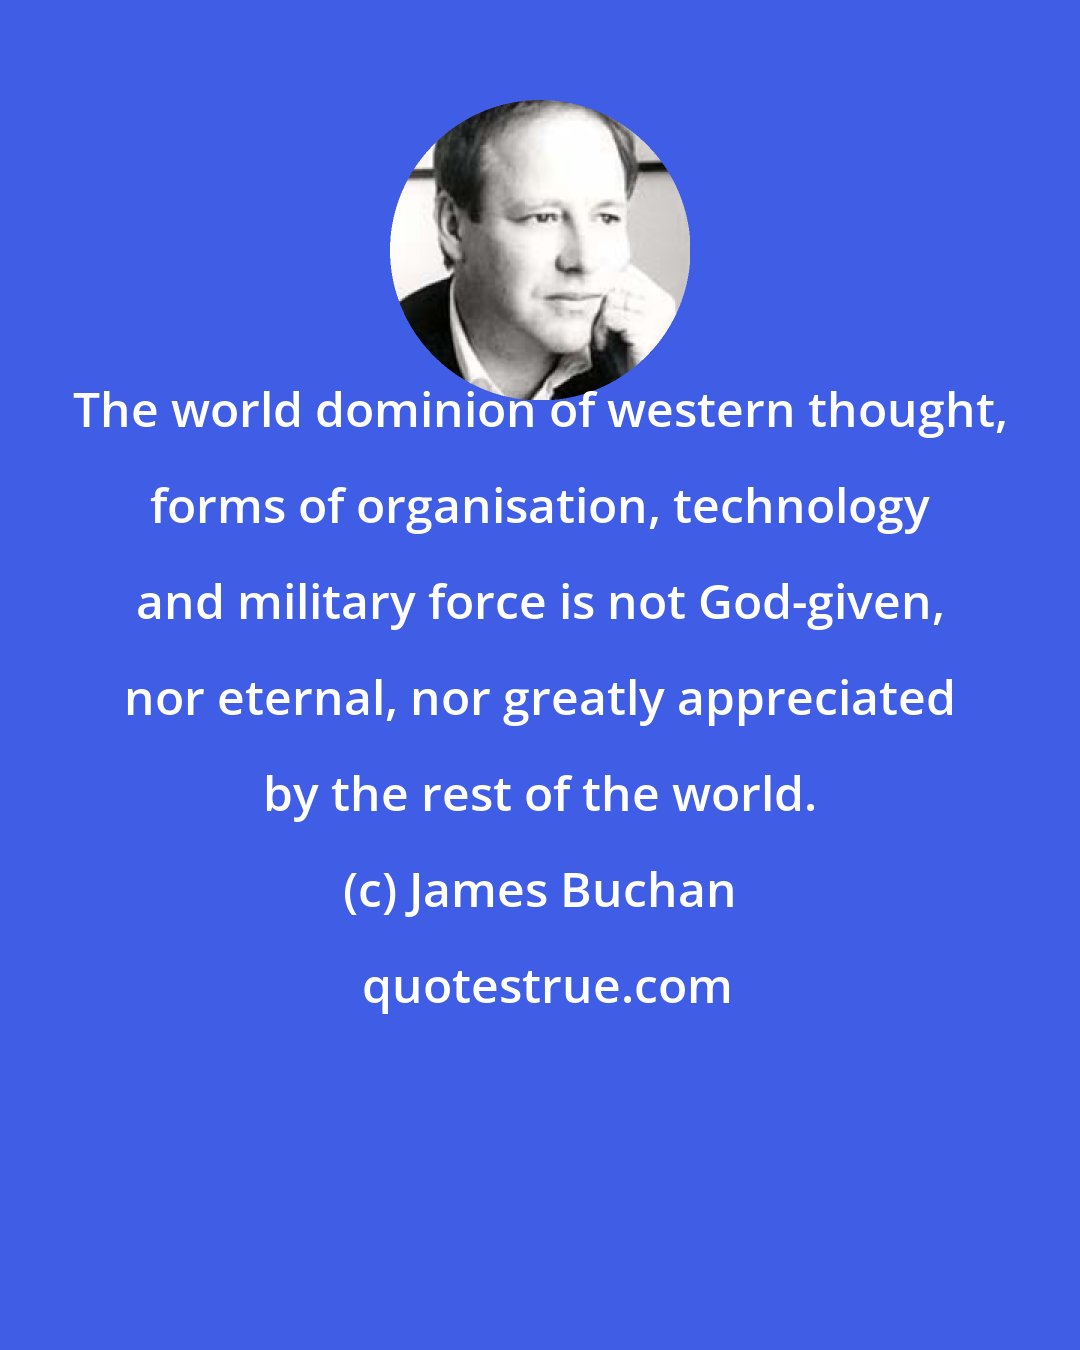 James Buchan: The world dominion of western thought, forms of organisation, technology and military force is not God-given, nor eternal, nor greatly appreciated by the rest of the world.